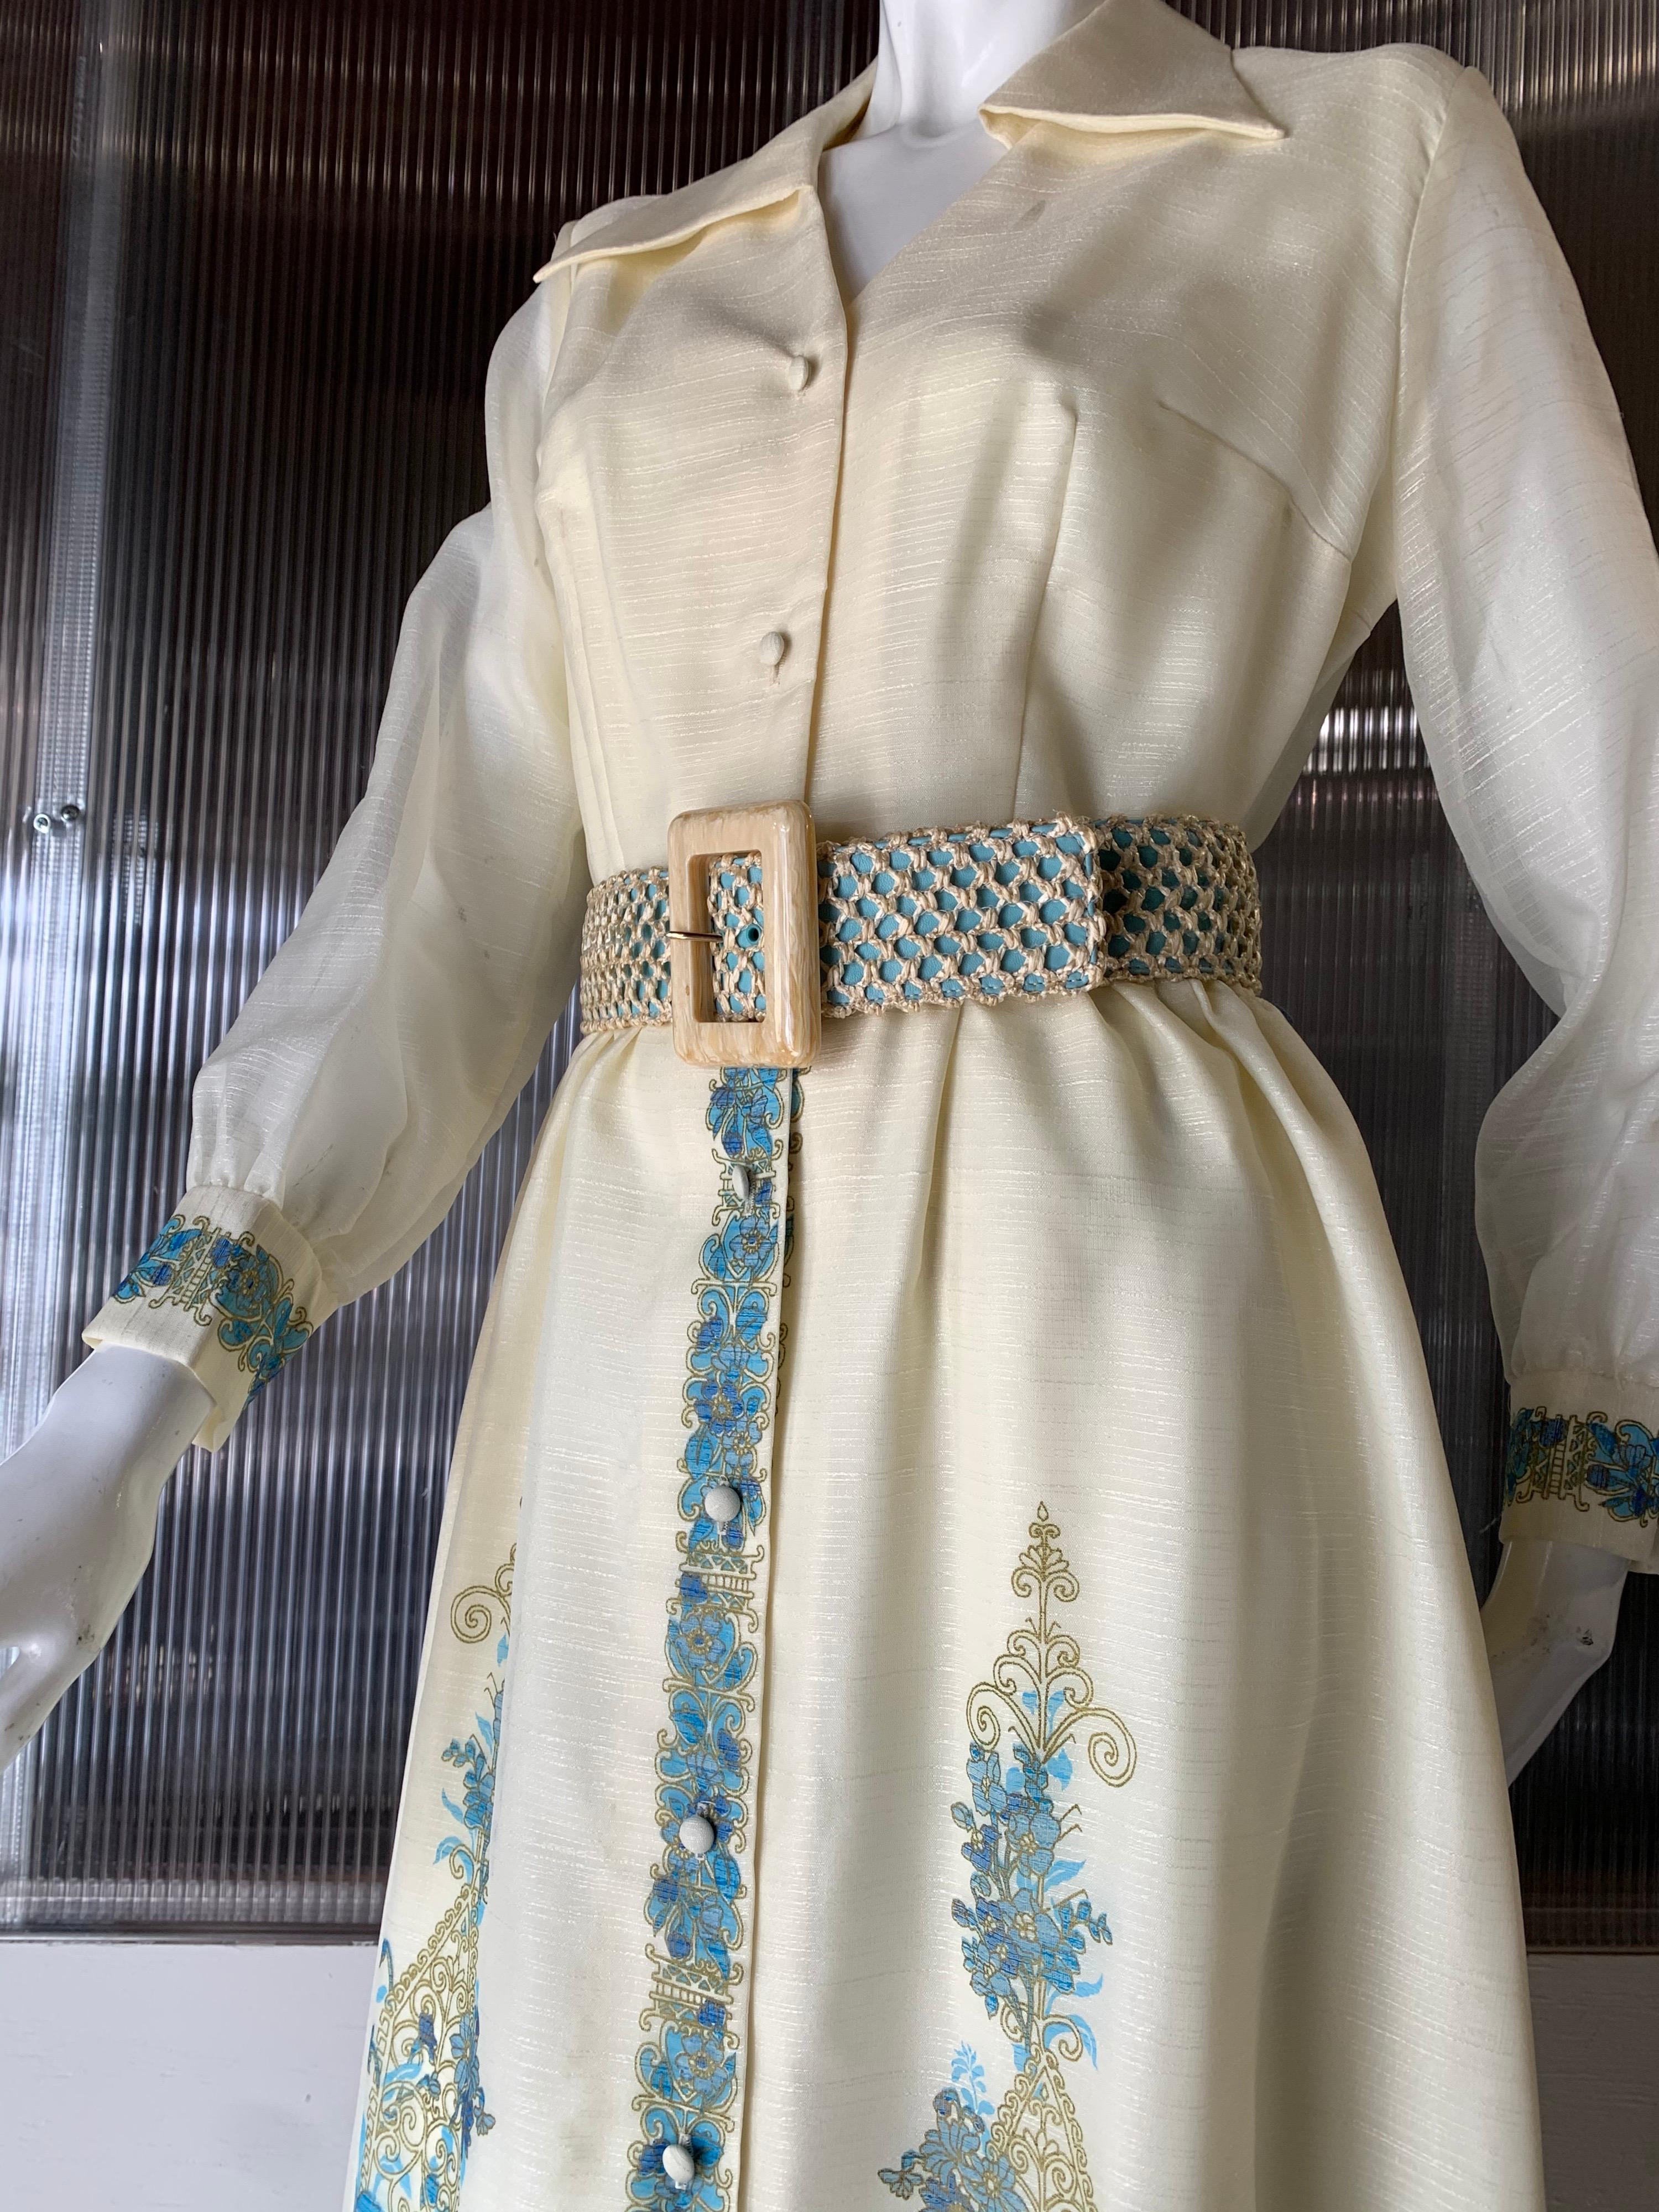 1960s Alfred Shaheen ivory hostess maxi dress with turquoise Polynesian print on skirt and cuffs. Button down front style. Original braided belt. Never worn.